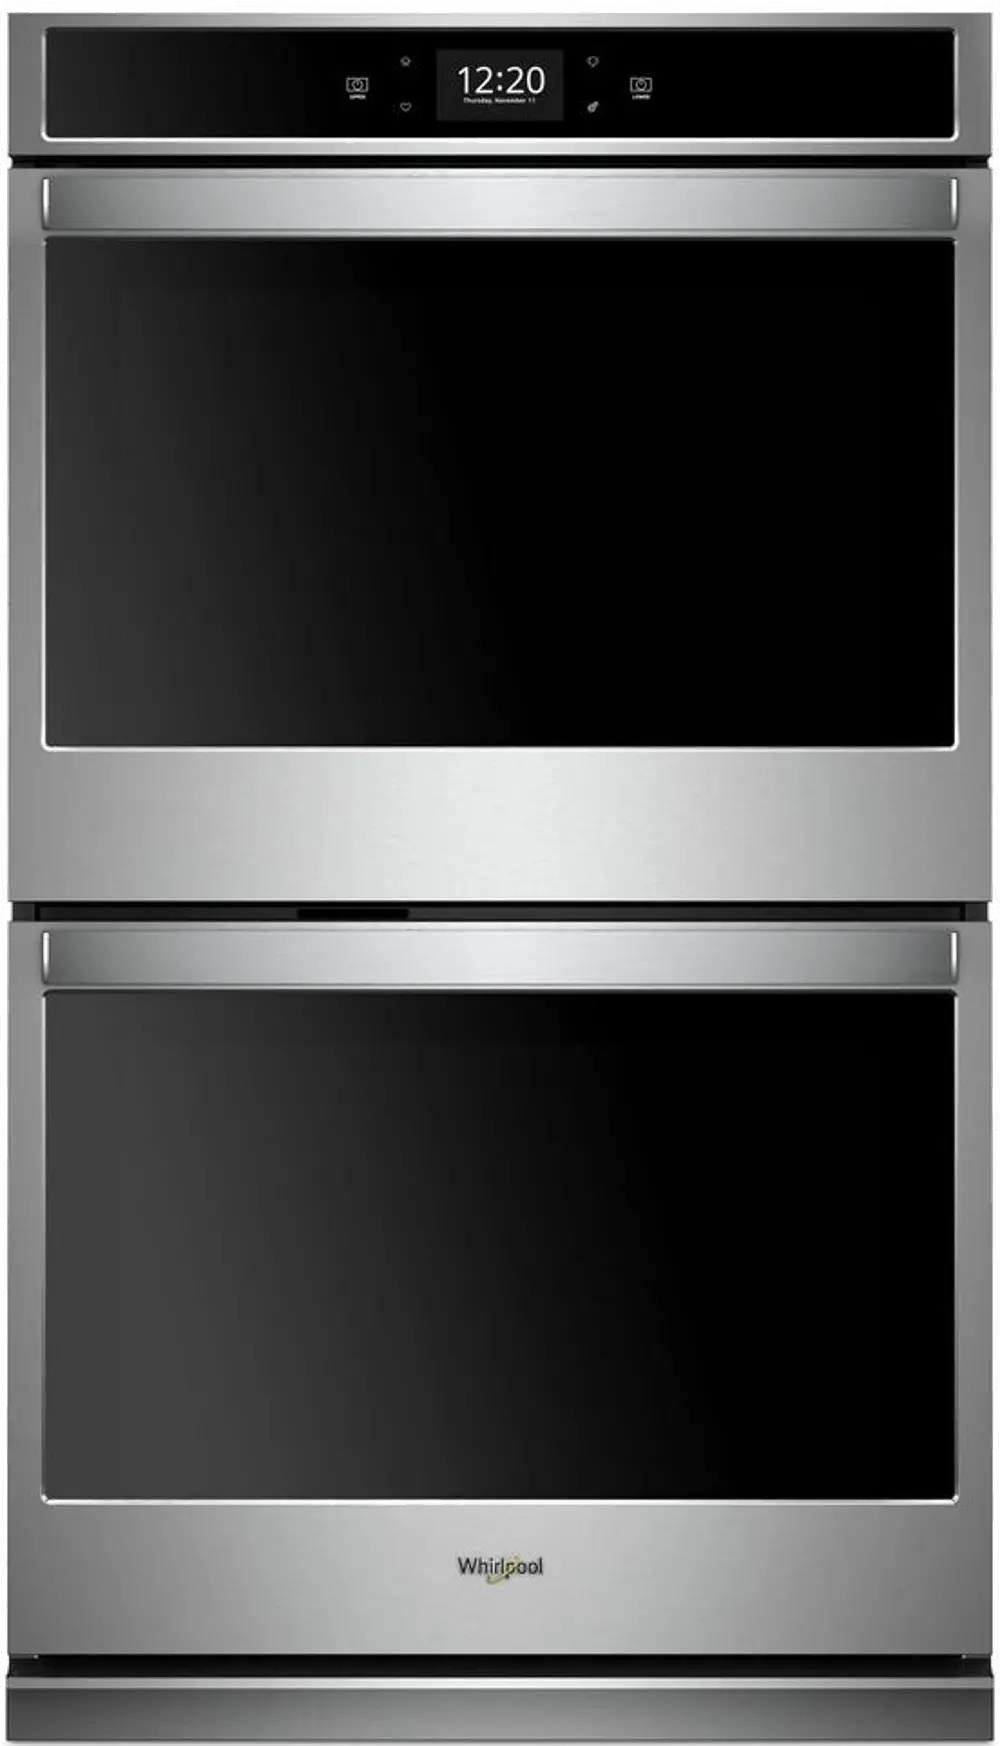 WOD77EC7HS Whirlpool 8.6 cu ft Double Wall Oven - Stainless Steel 27 Inch-1